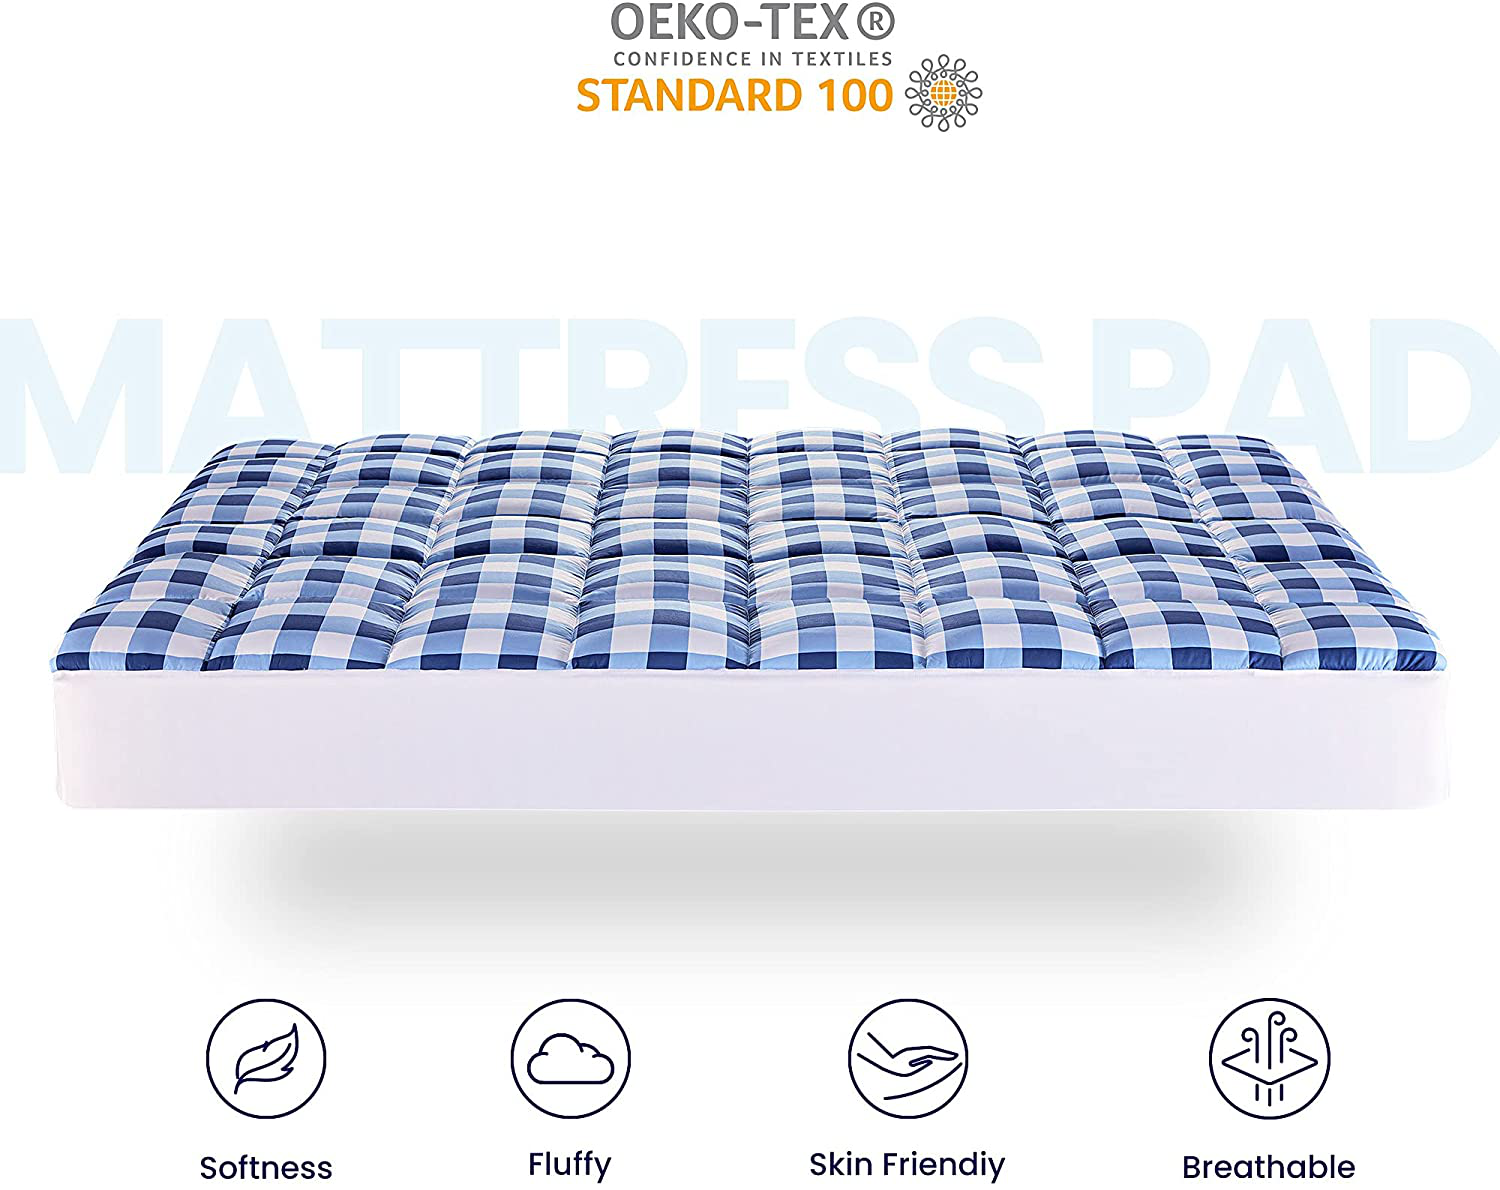 SLEEP ZONE Quilted Mattress Pad Cover Printed Geometric Grid Topper Overfilled Fluffy Soft Pillow Top Down Alternative Fill Fits up to 21 inch Deep Pocket, Blue, Full